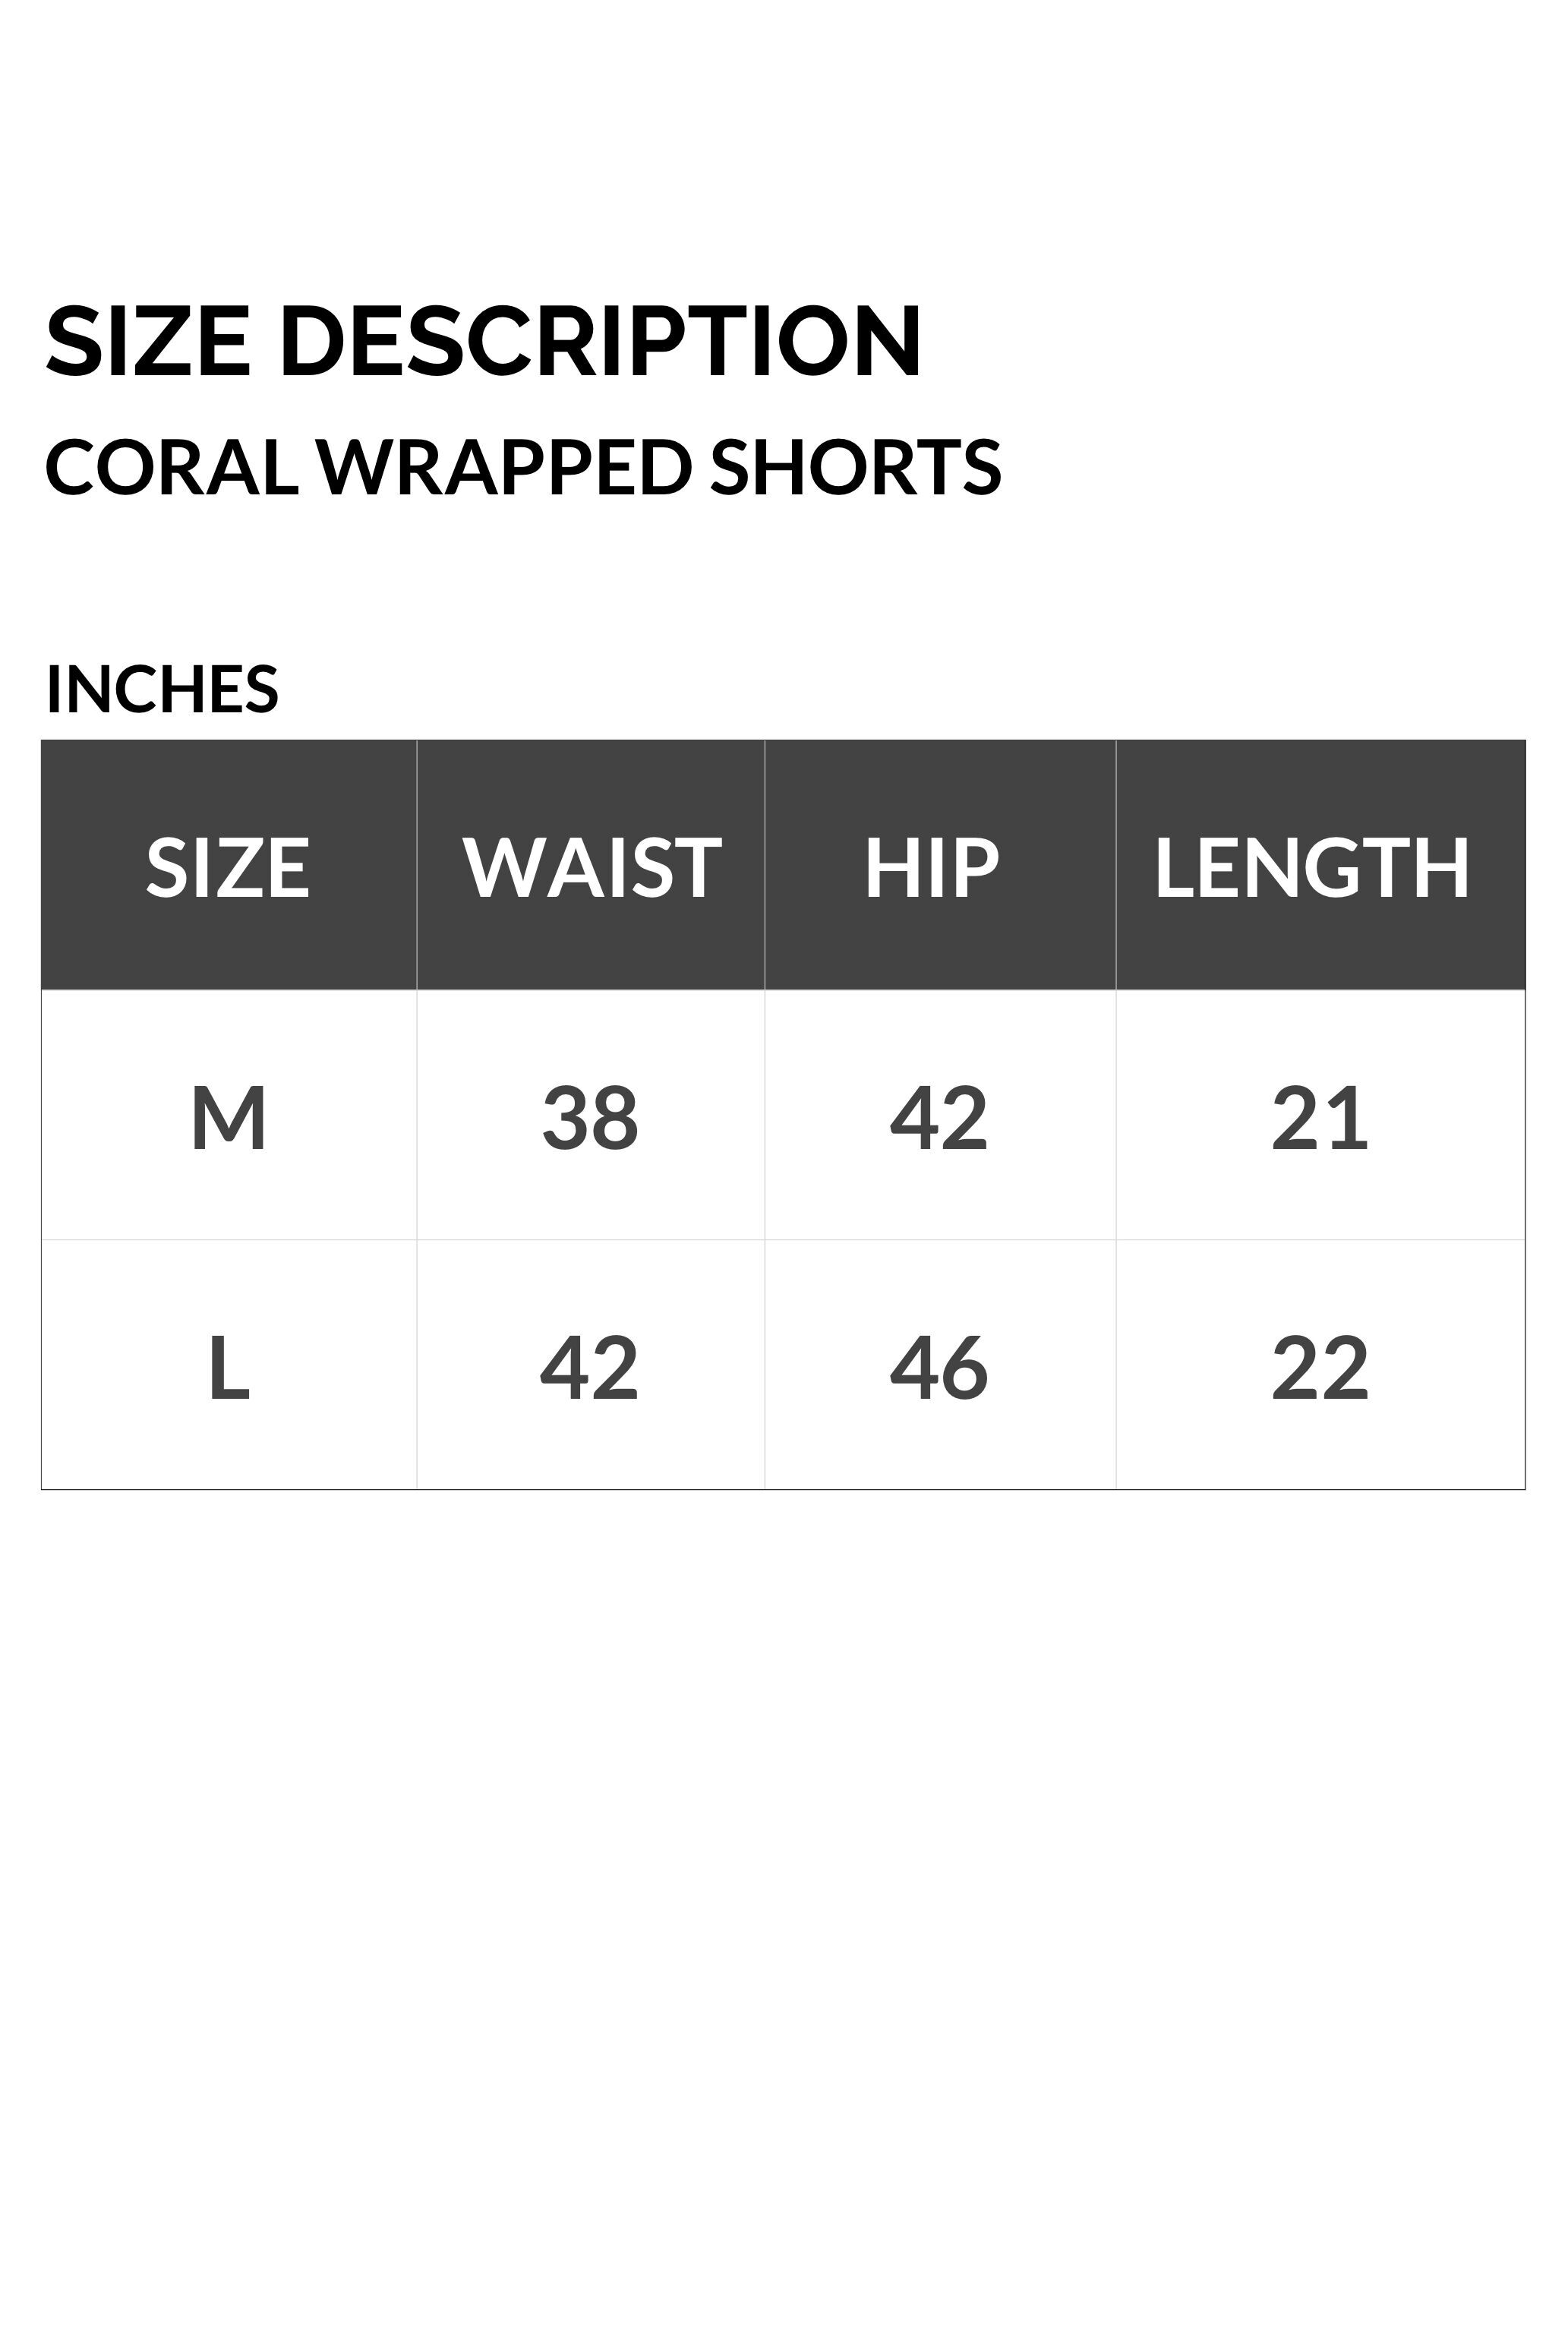 SIZE CORAL WRAPPED SHORTS